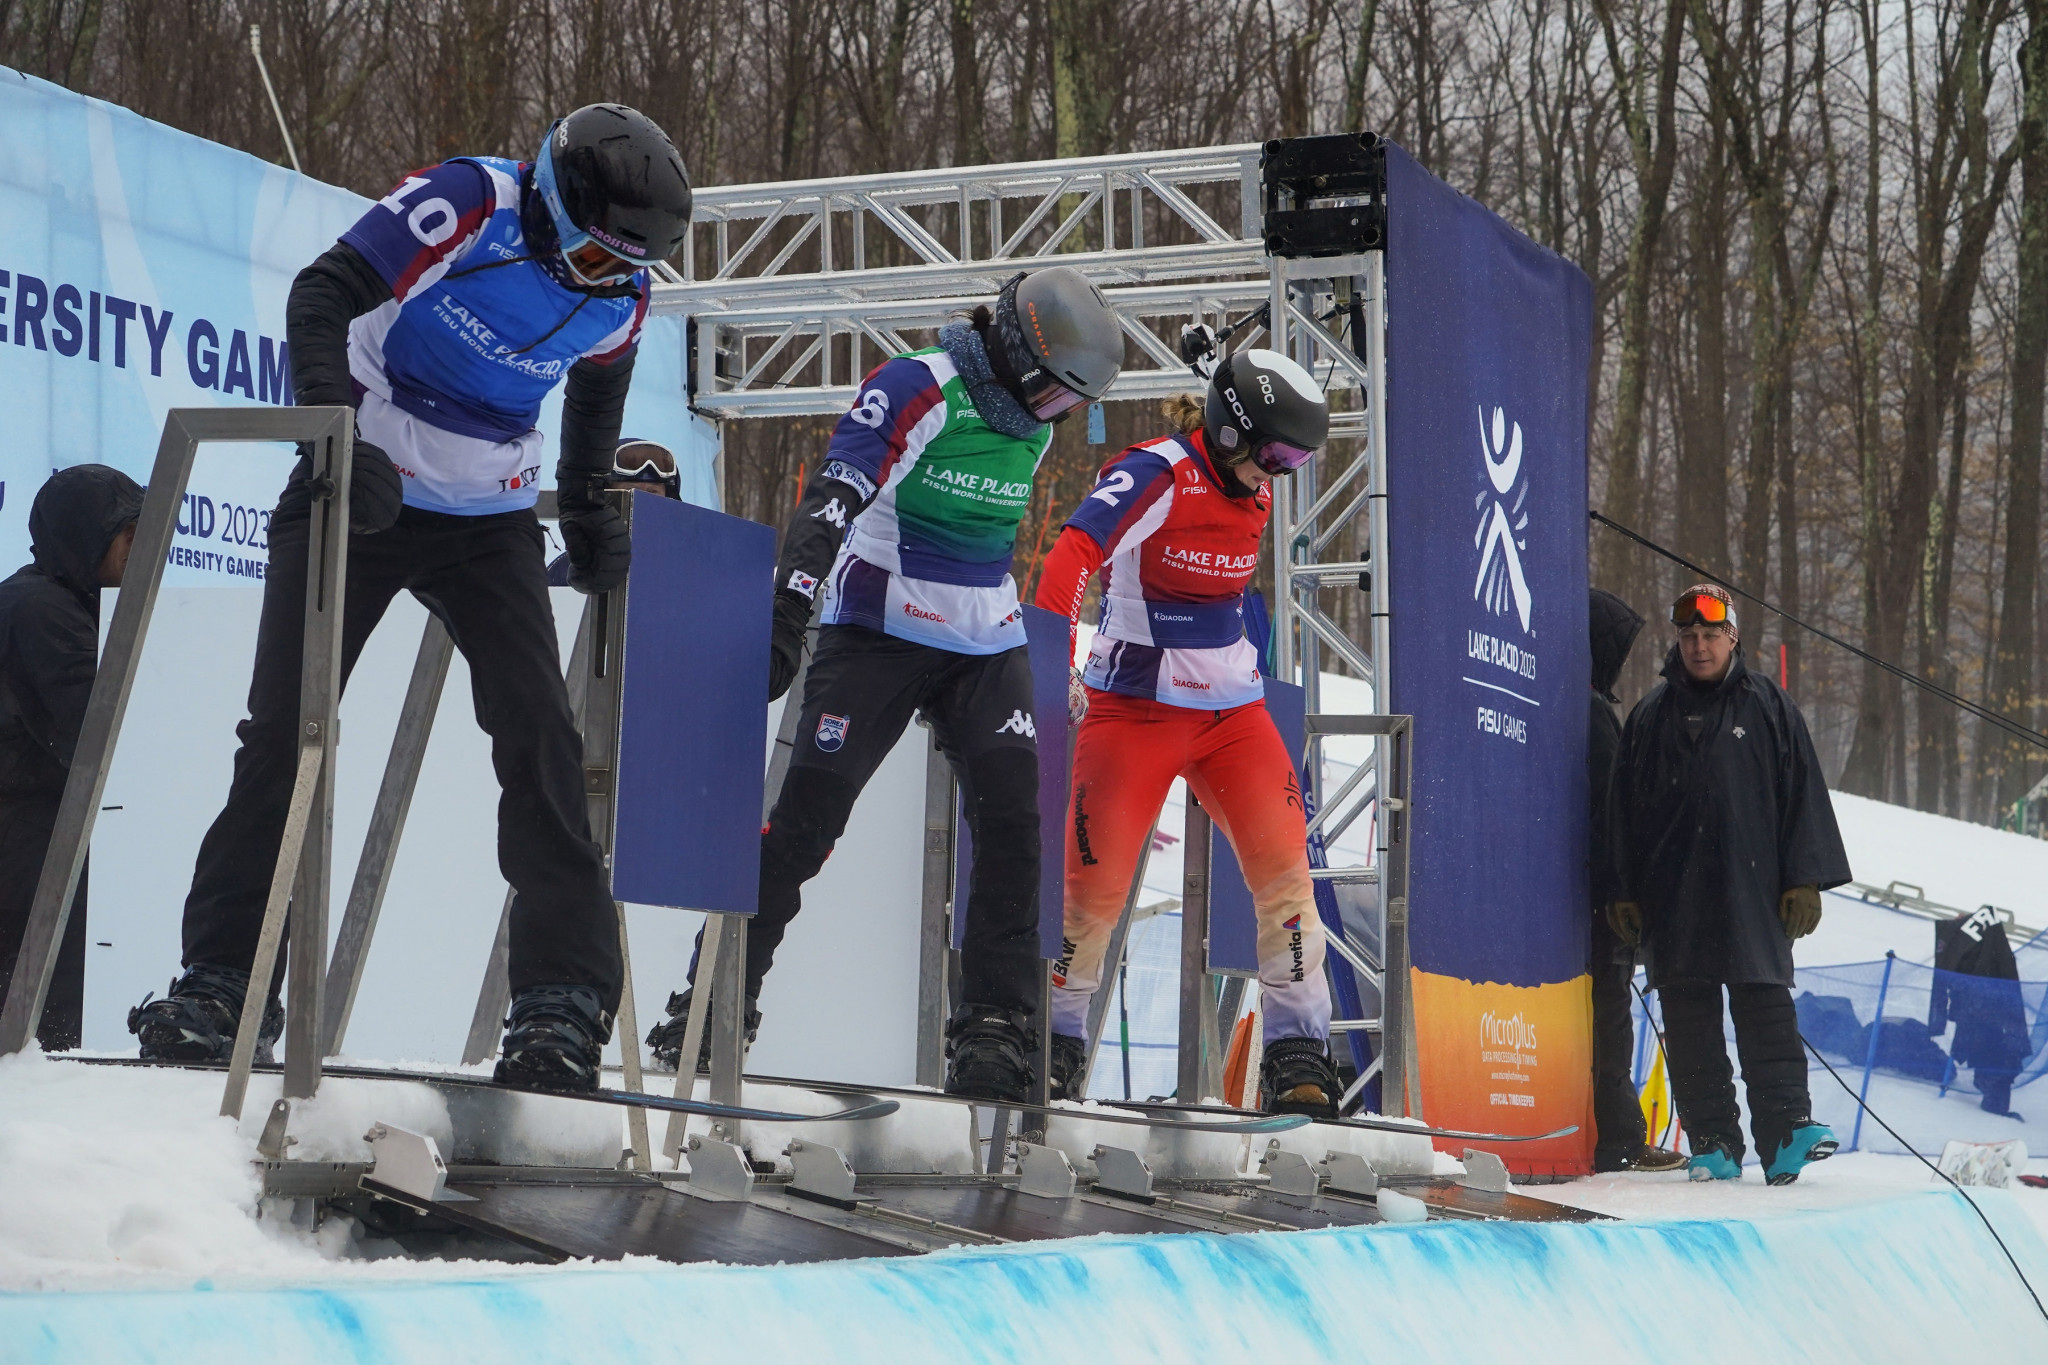 Men's and women's snowboard cross contests were the focus at Gore Mountain ©FISU